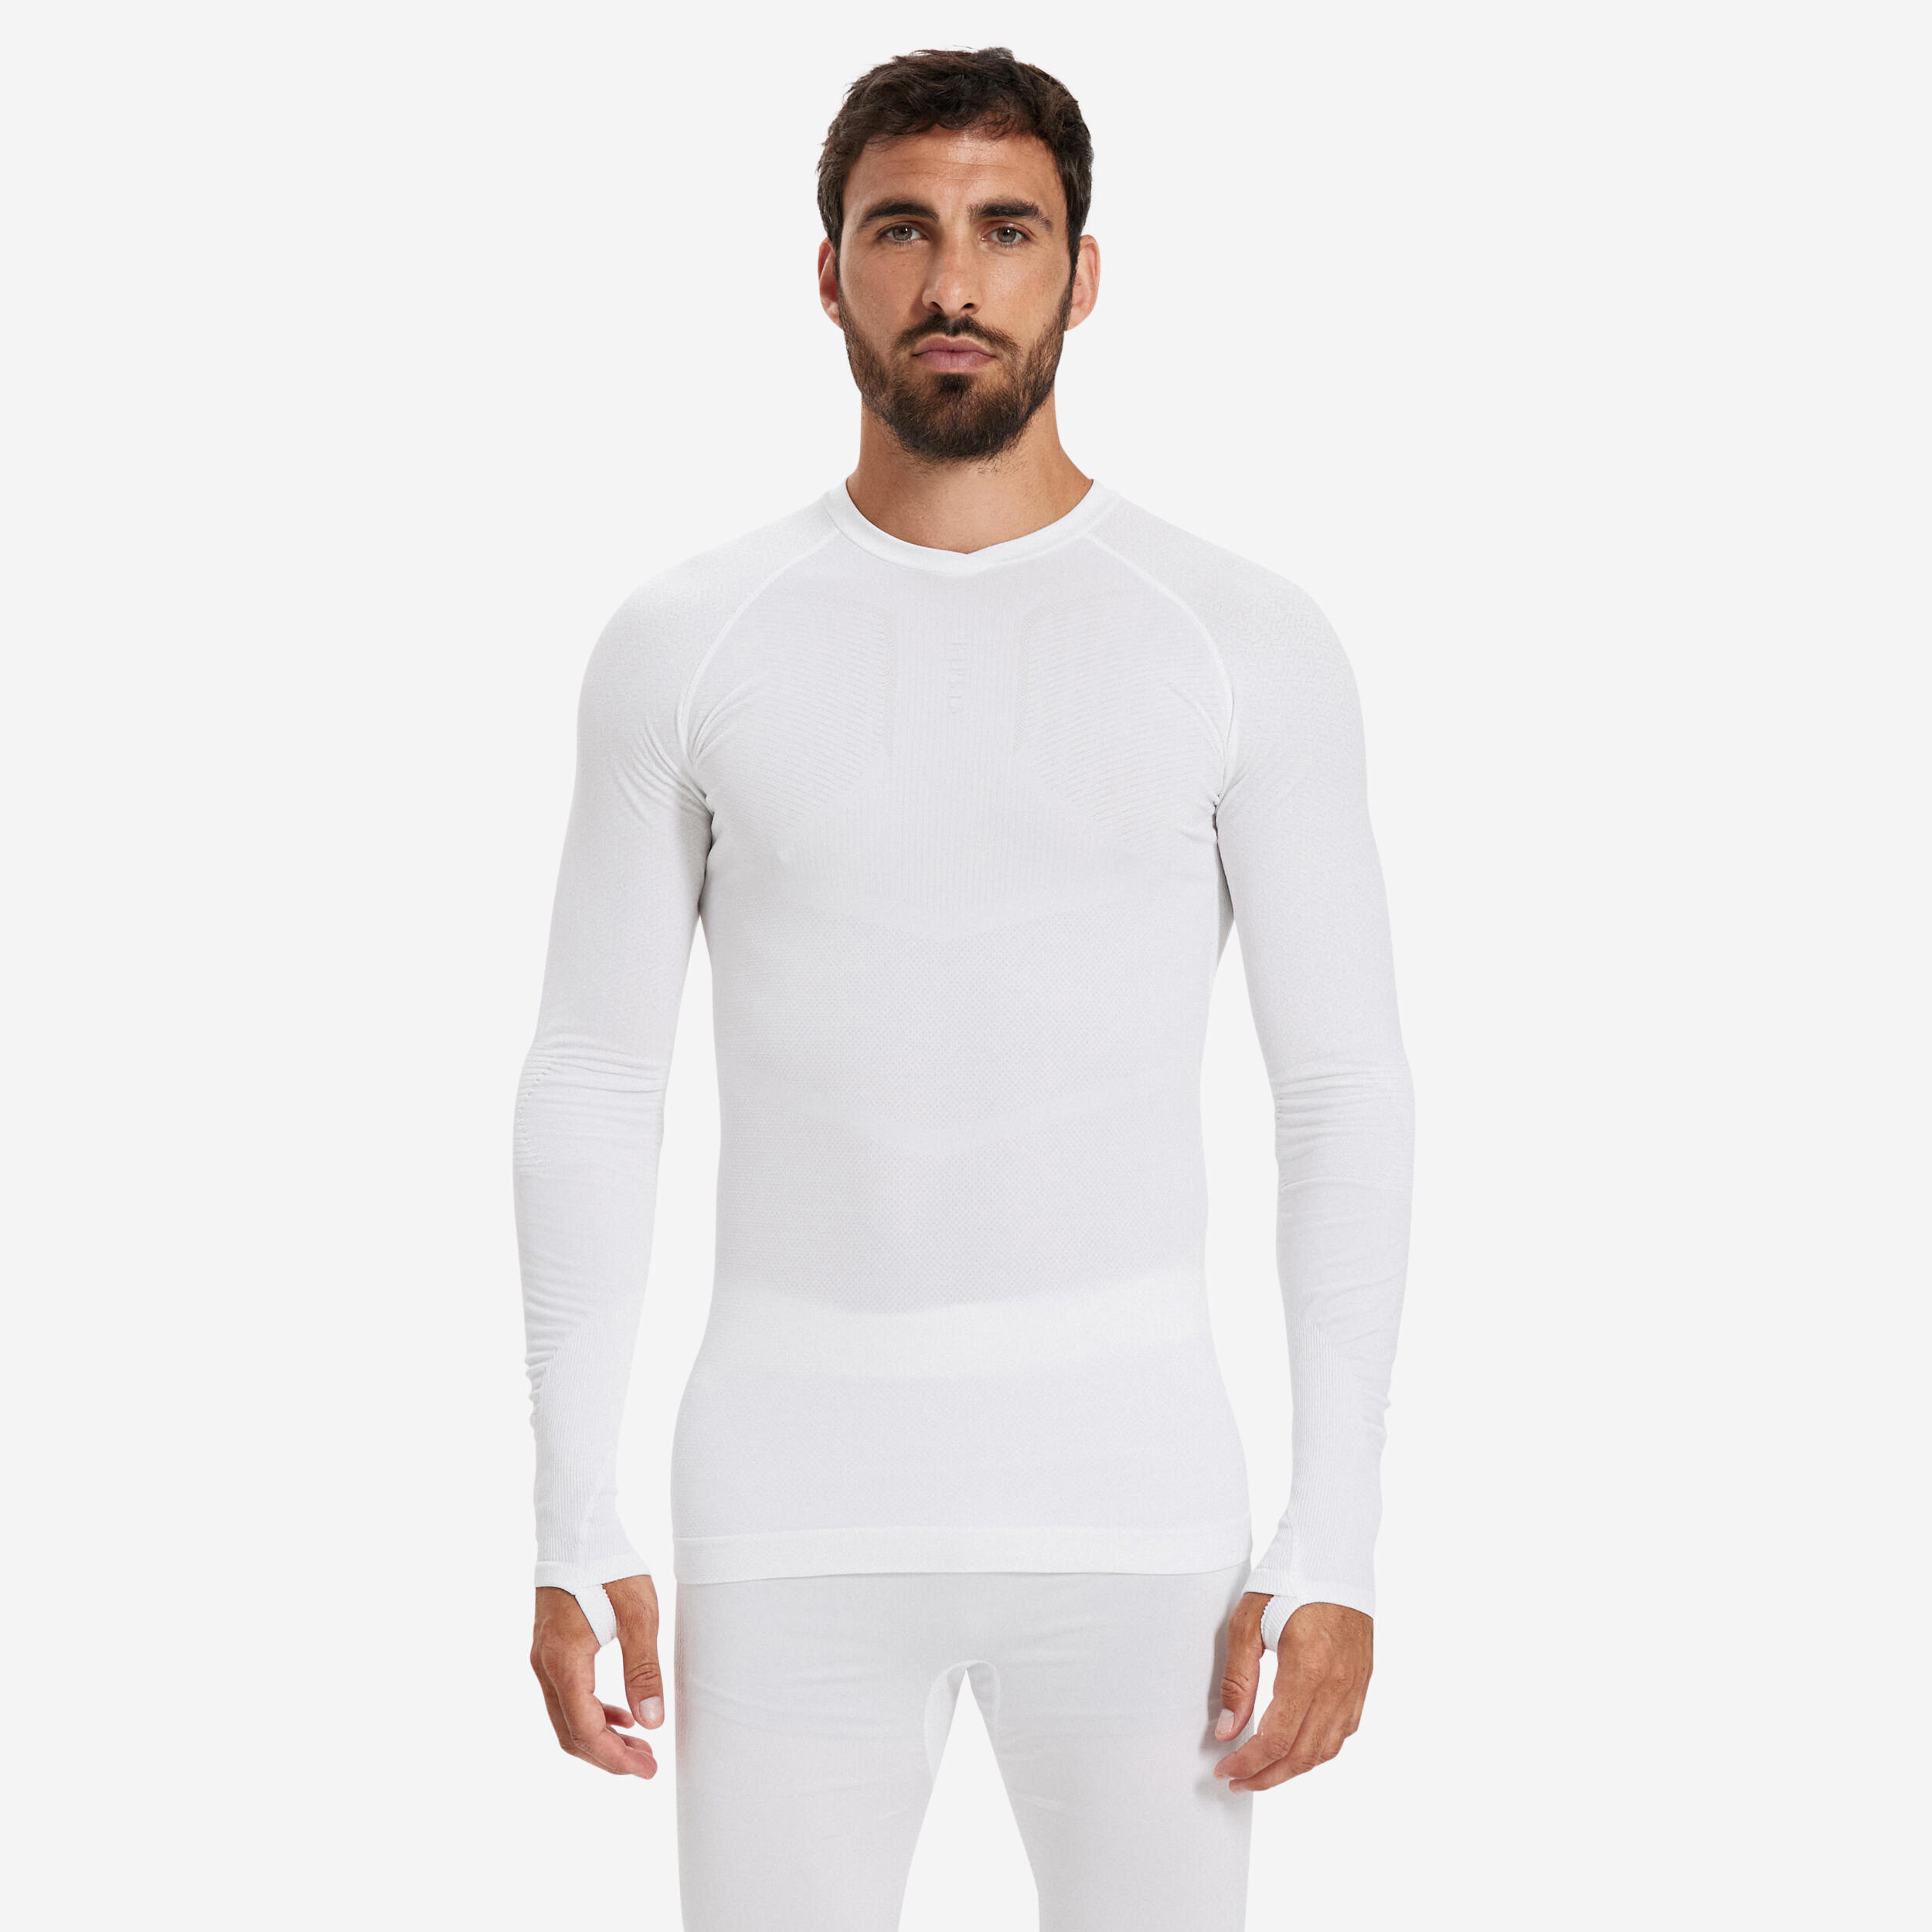 Adult Long-Sleeved Thermal Base Layer Top Keepdry 500 - White KIPSTA